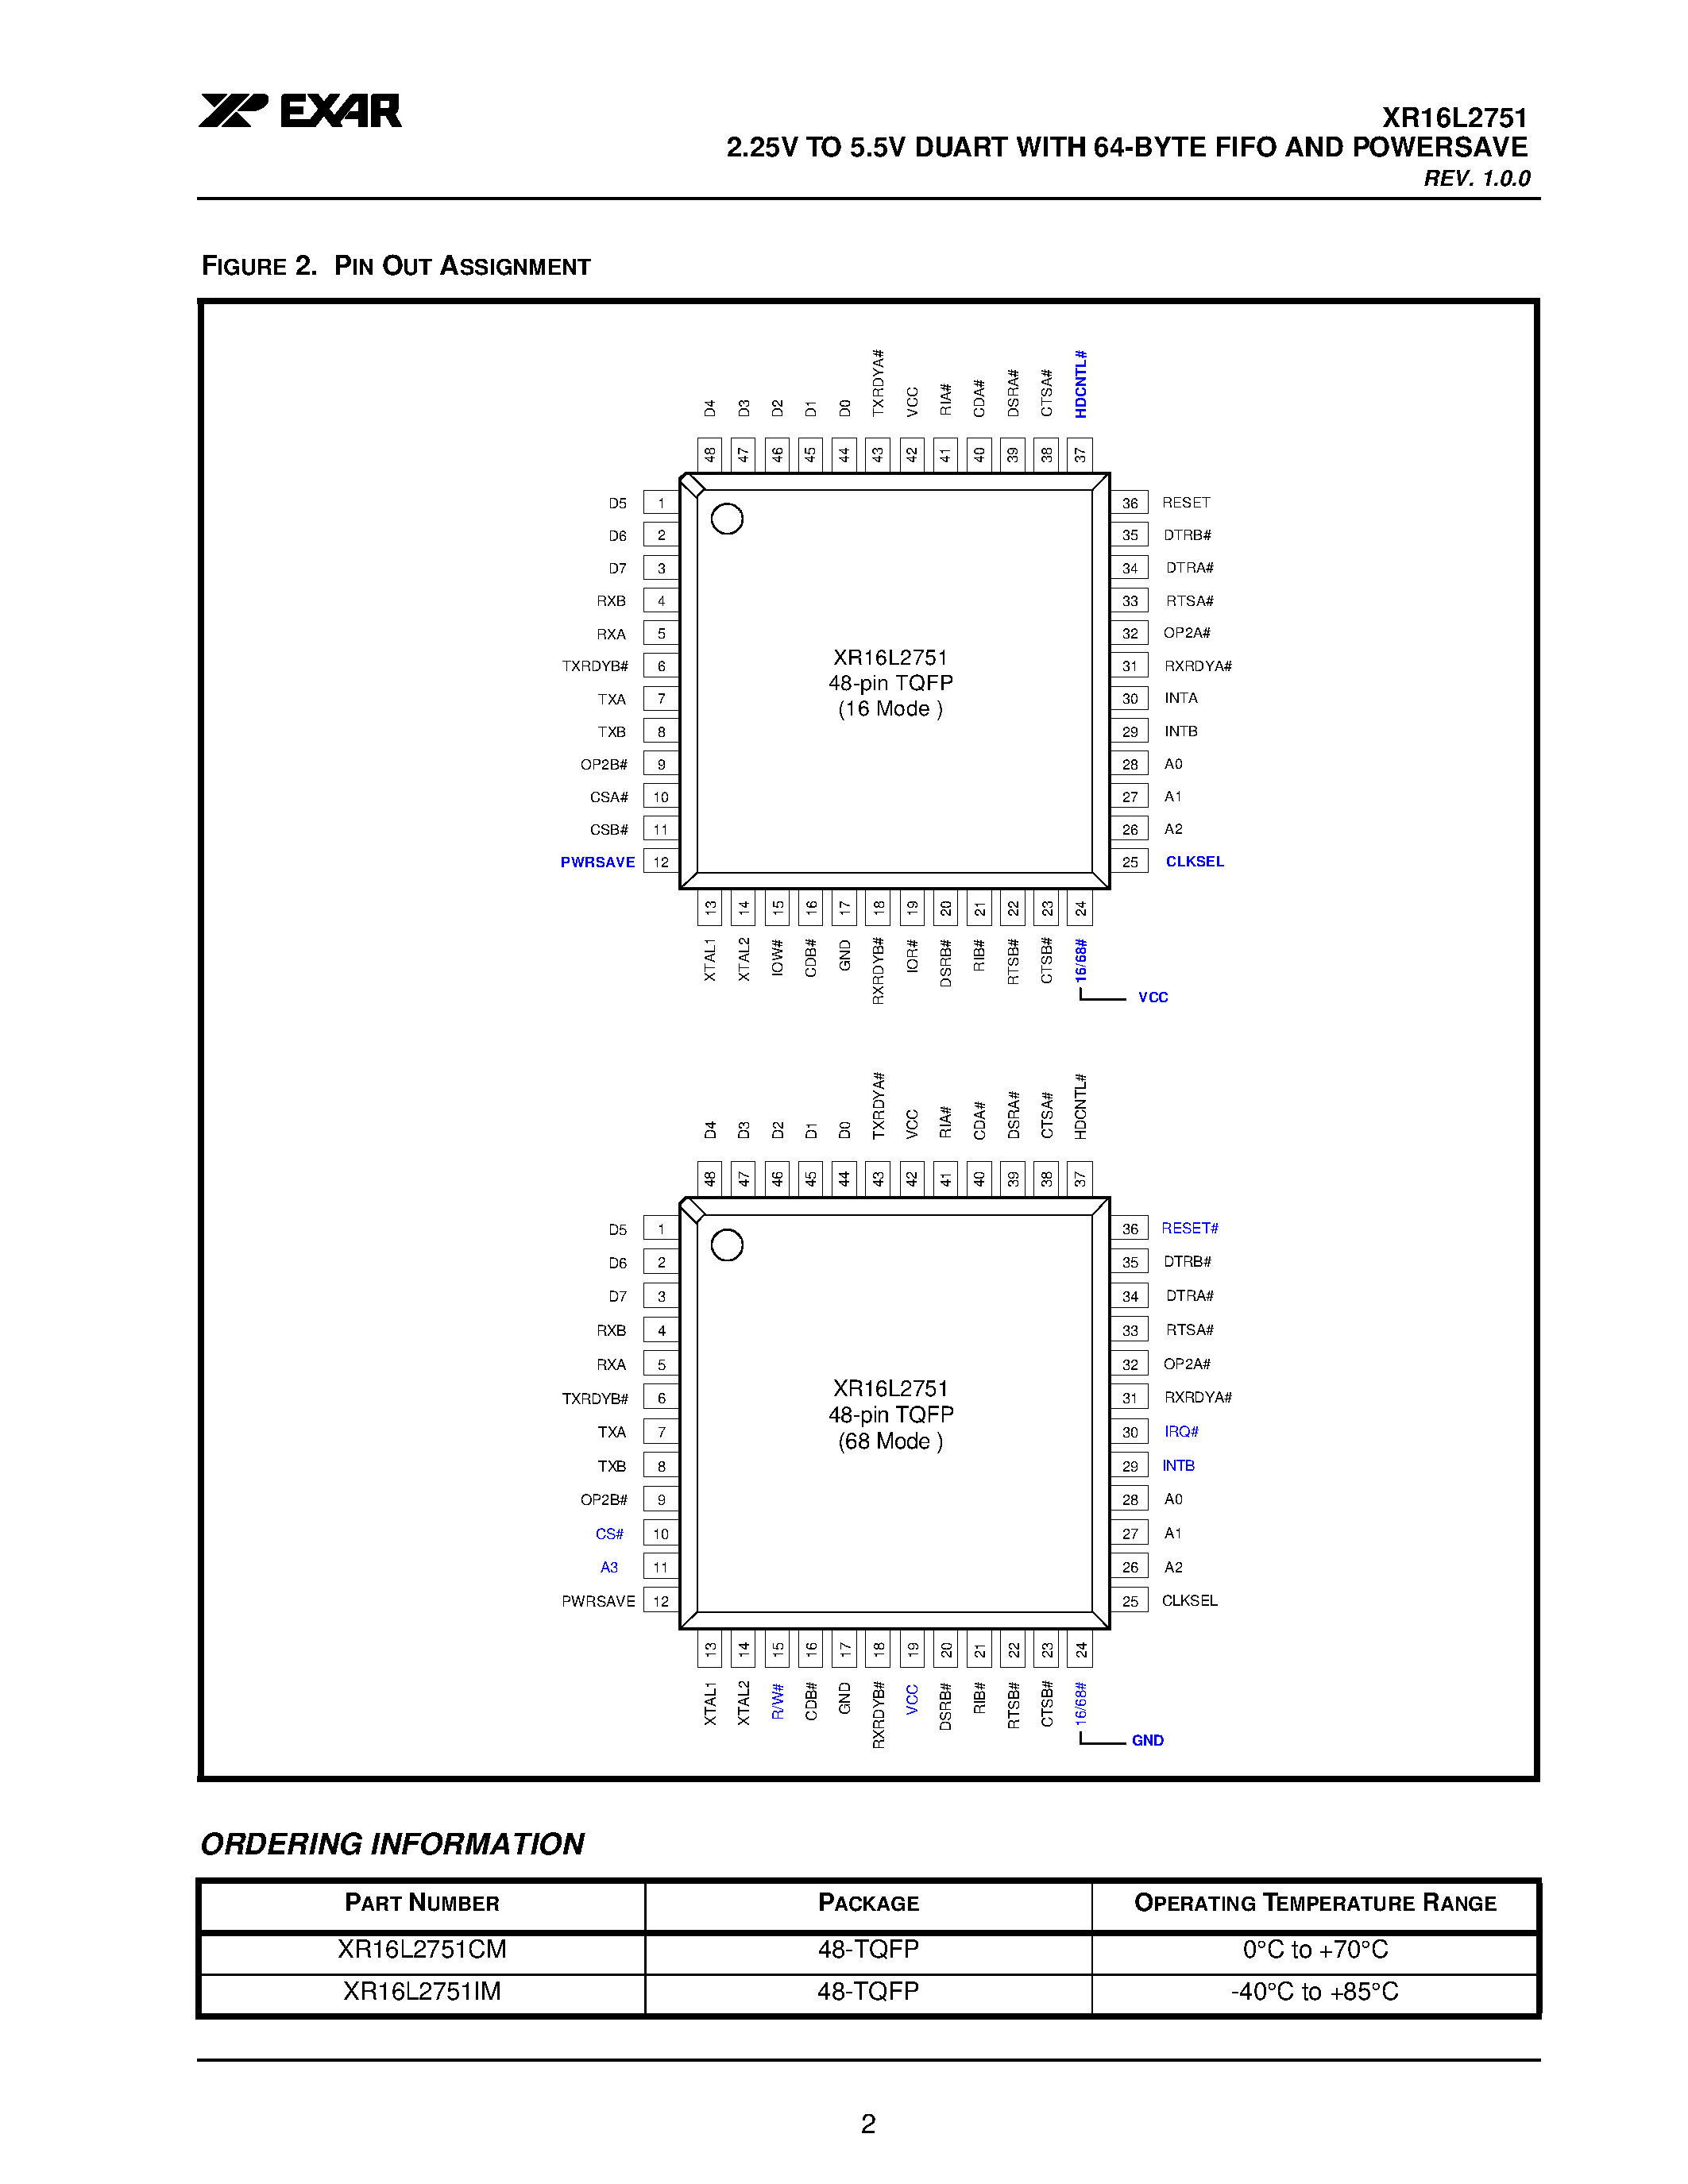 Datasheet XR16L2751IM - 2.25V TO 5.5V DUART WITH 64-BYTE FIFO AND POWERSAVE page 2